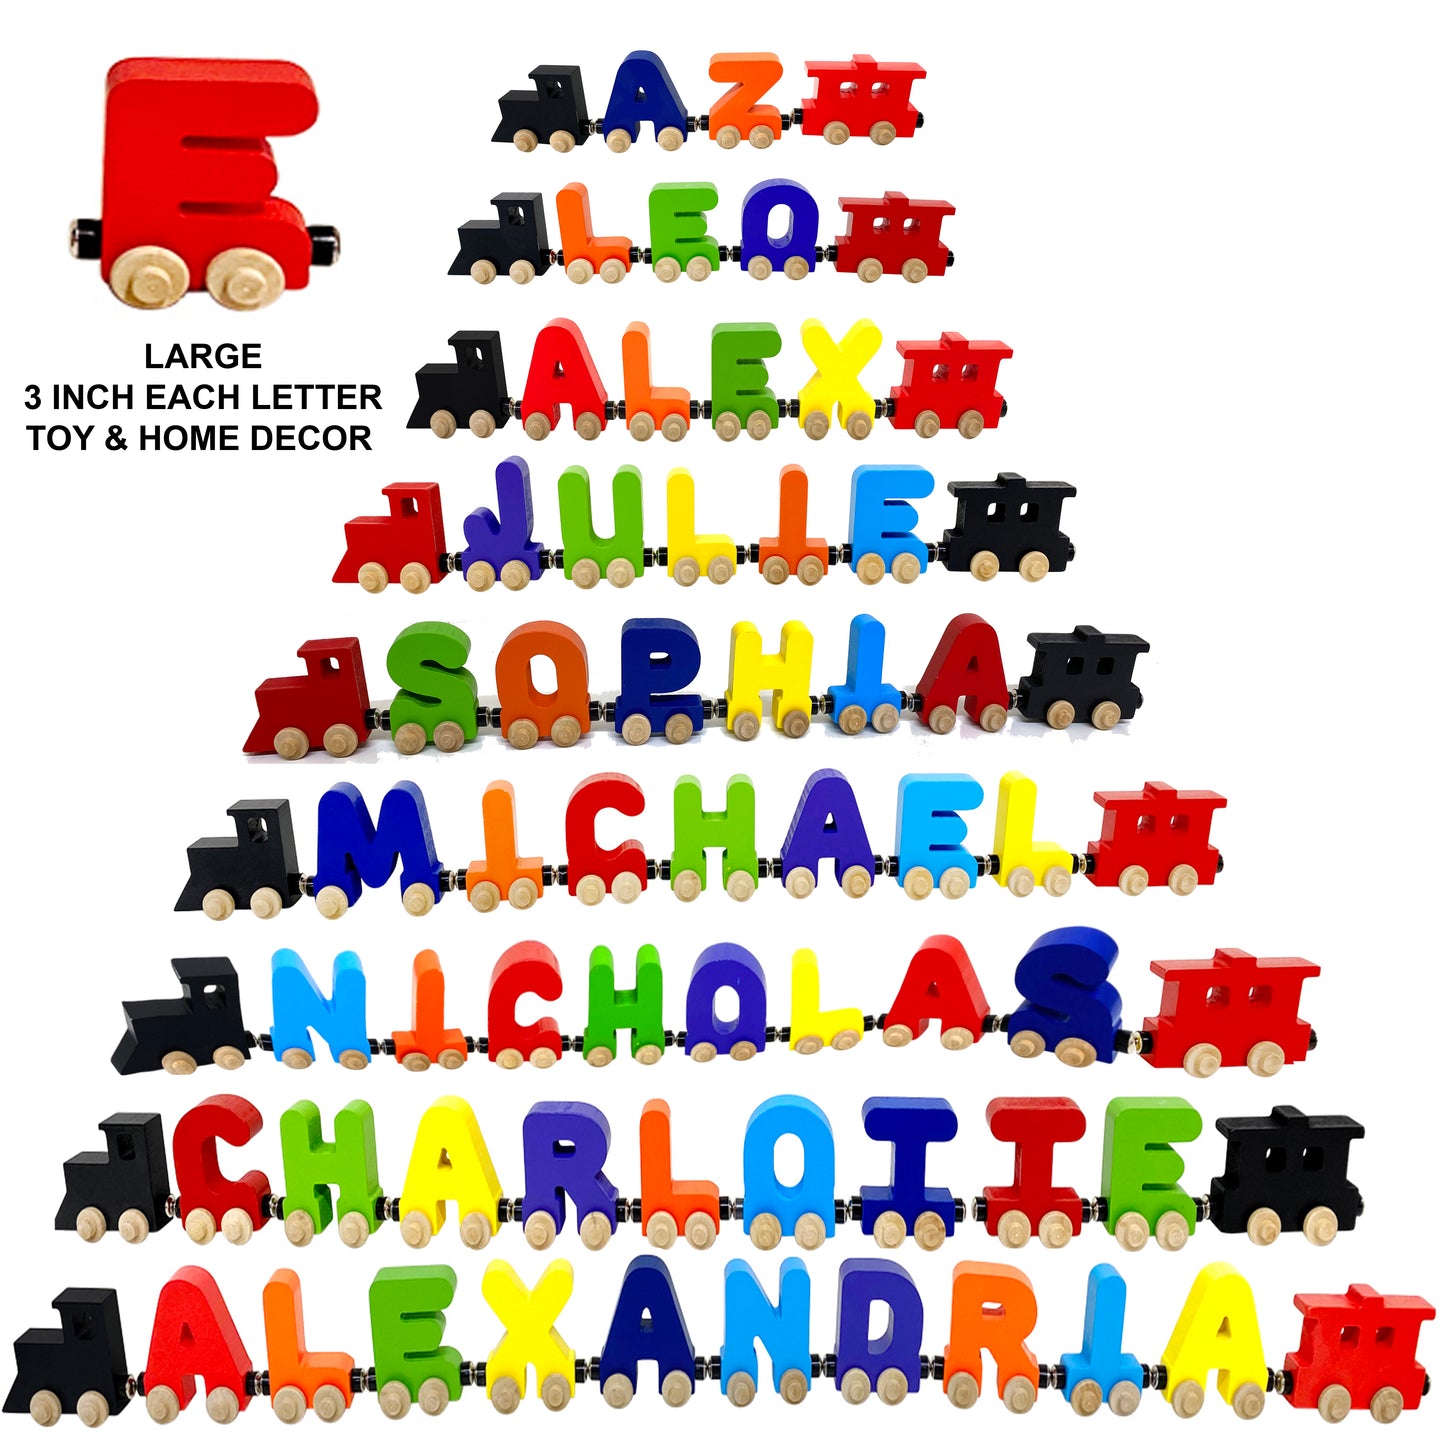 9 Letter Train Wooden Perosnalized Name Letters Includes Train & Wagon Letters Puzzle Includes Train & Wagon Free